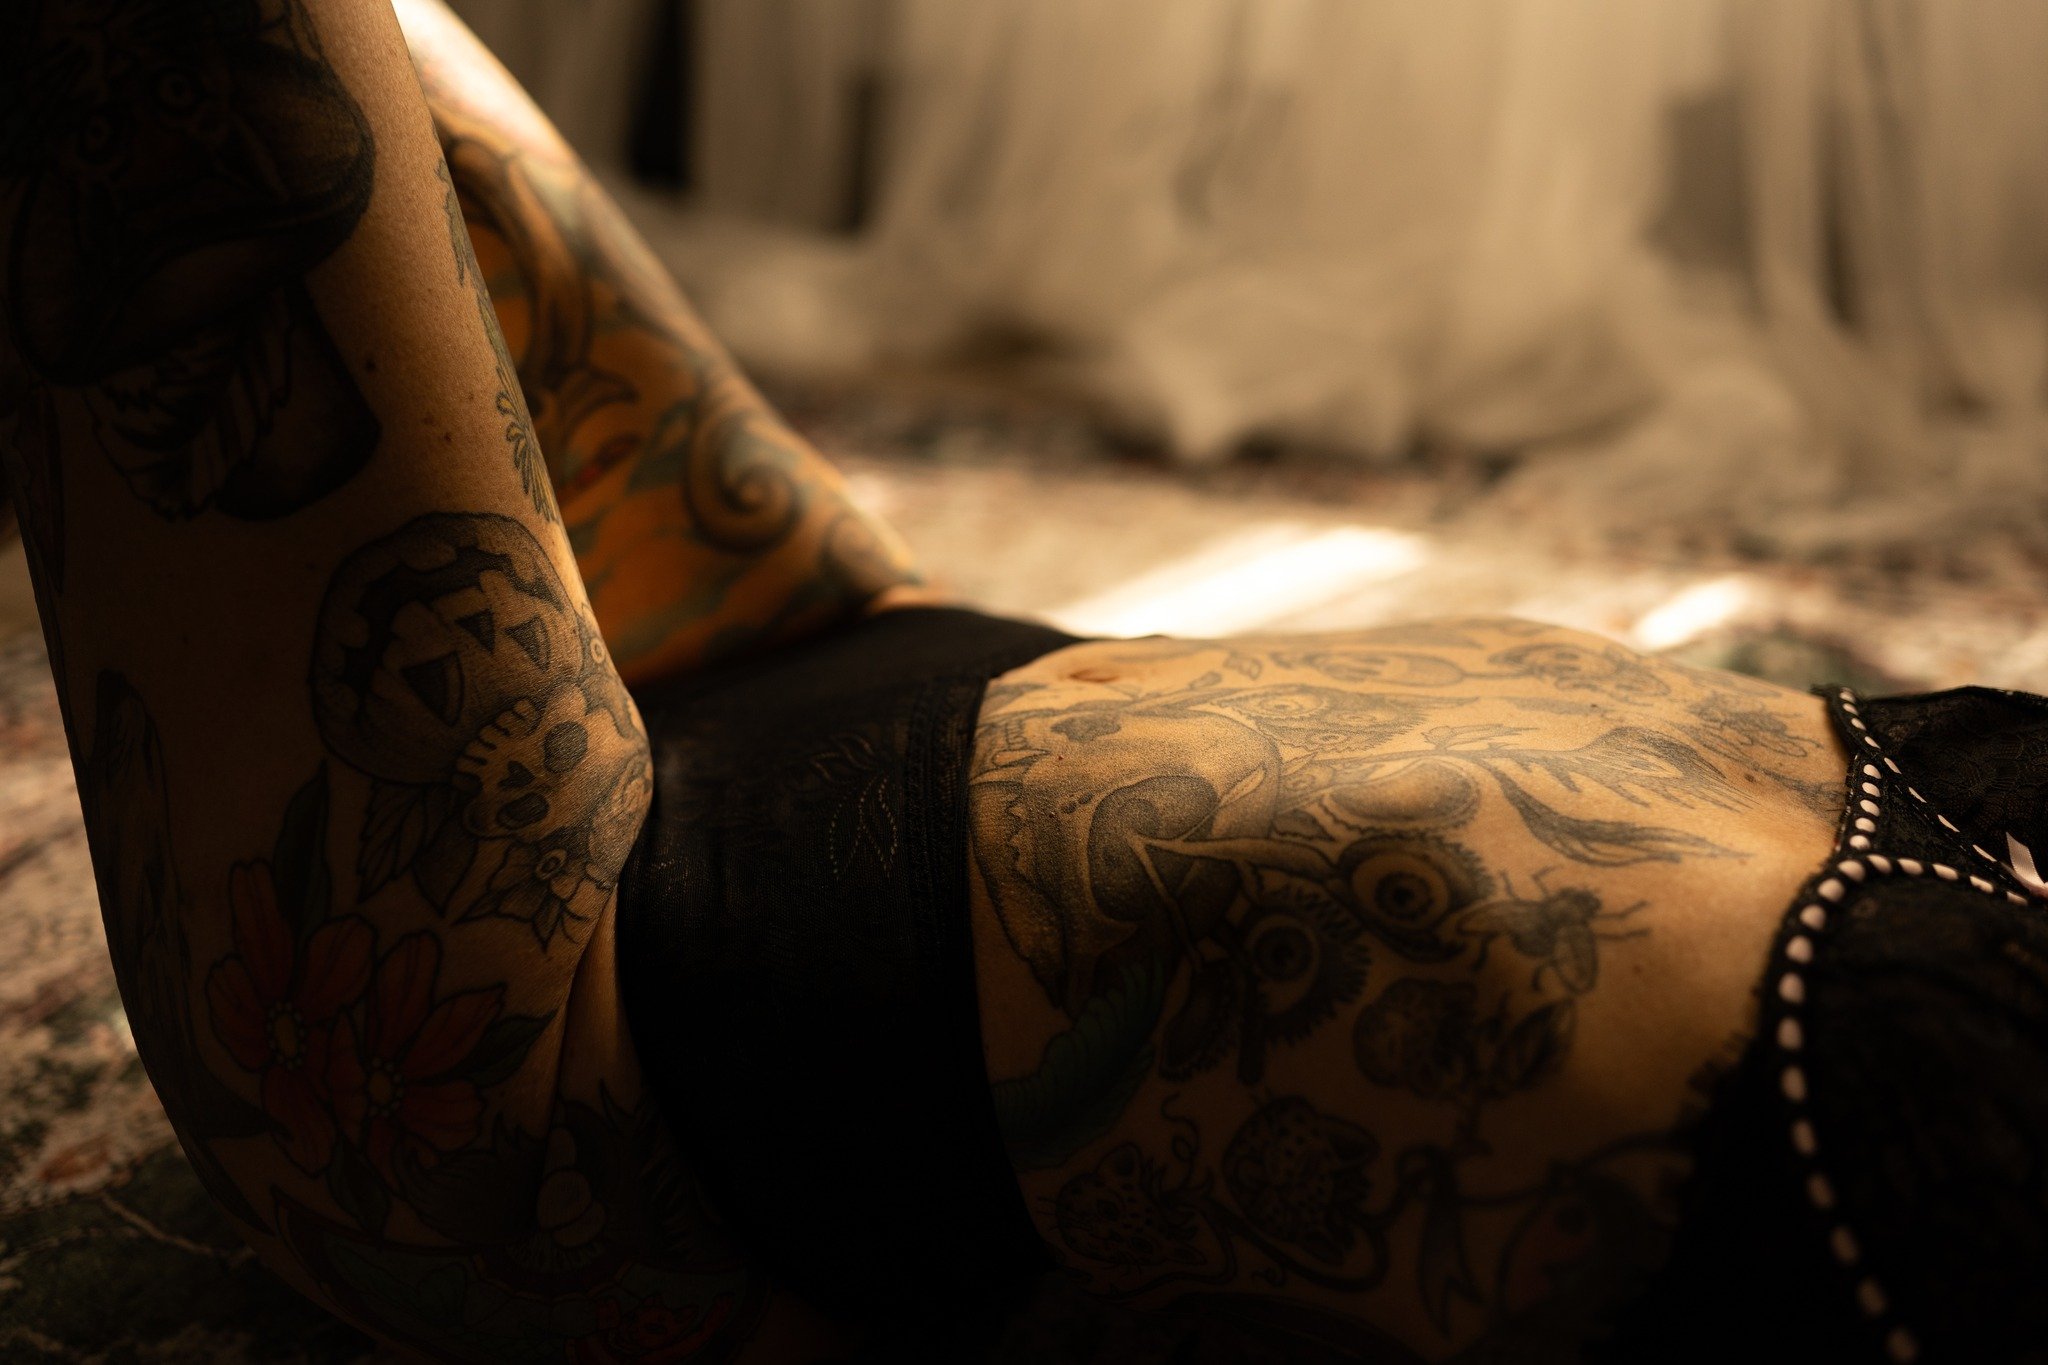 Hey ladies, have I mentioned how much I'm a sucker for detail shots? This girl's tattoos were just begging for all the close-ups, especially this captivating kitty skull that kept catching my camera's eye.
. 
www.boudoirbylawler.com
. 
#detailimages 